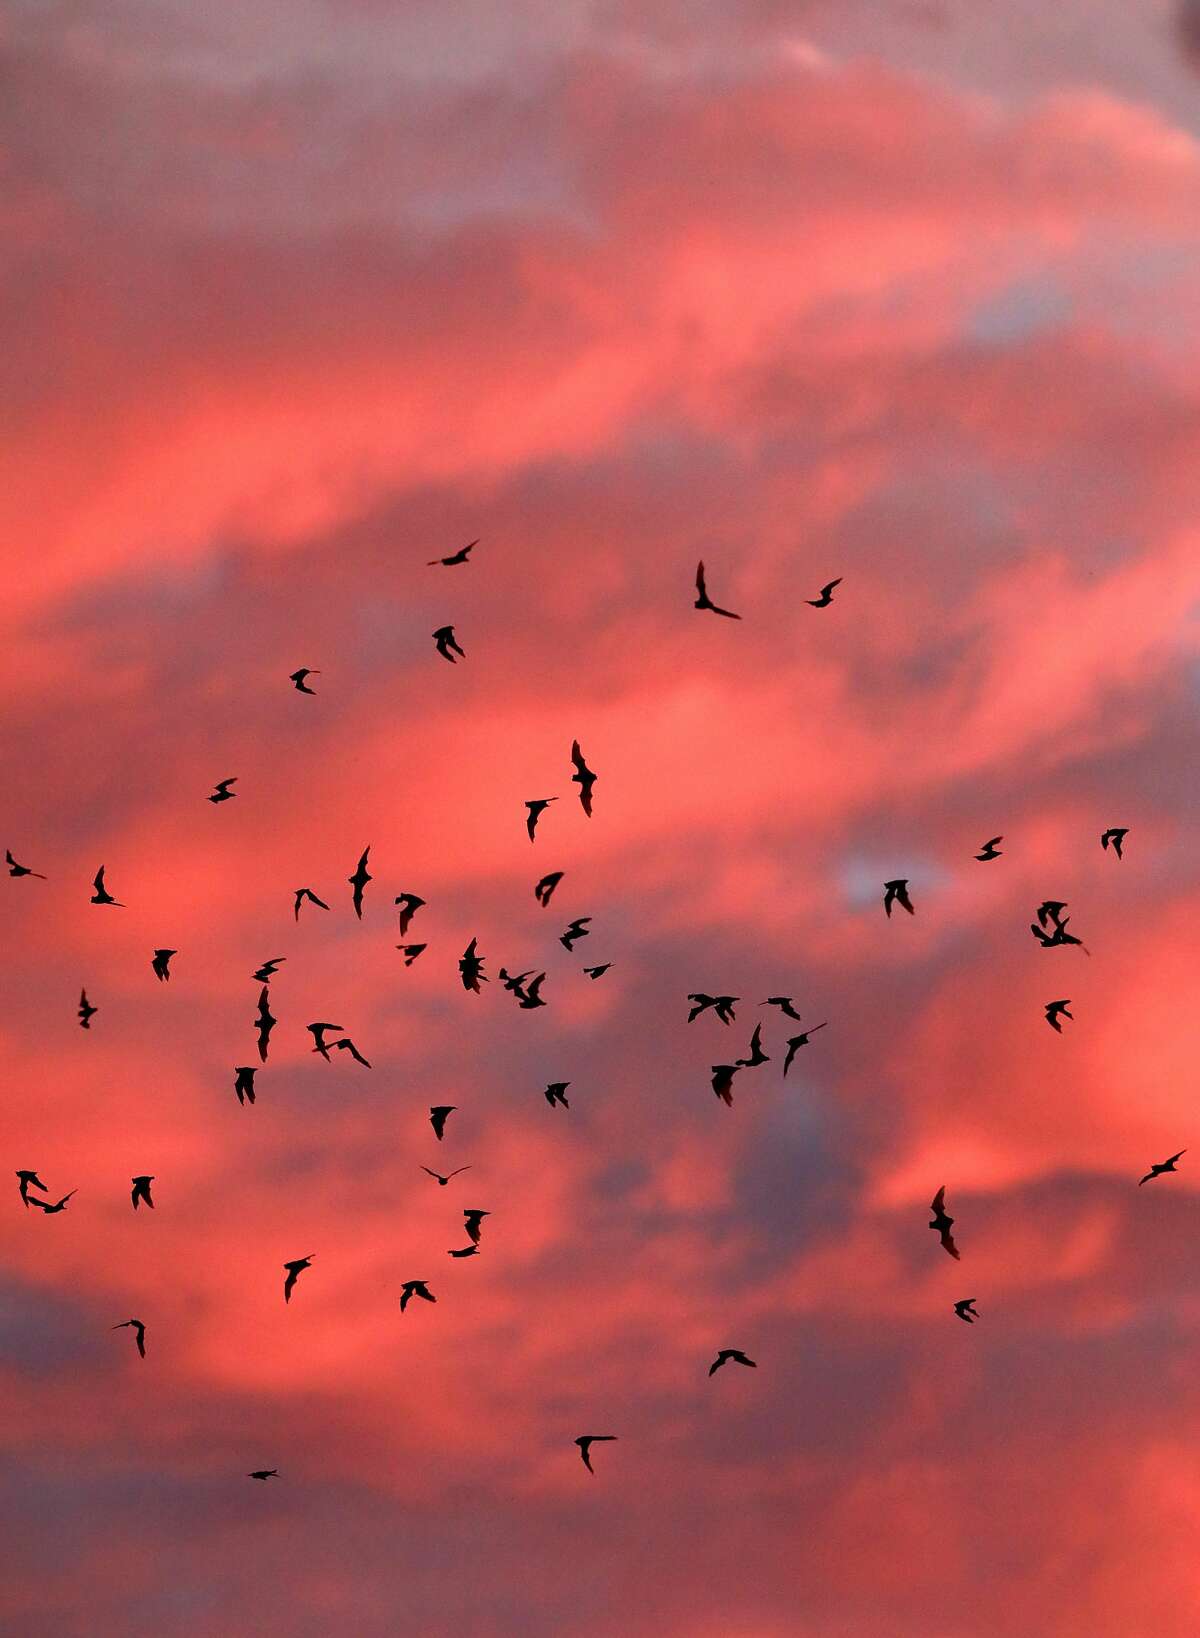 Thousands of bats take flight from the Yolo Causeway in Davis, Ca., as seen on Mon. August 5, 2019.